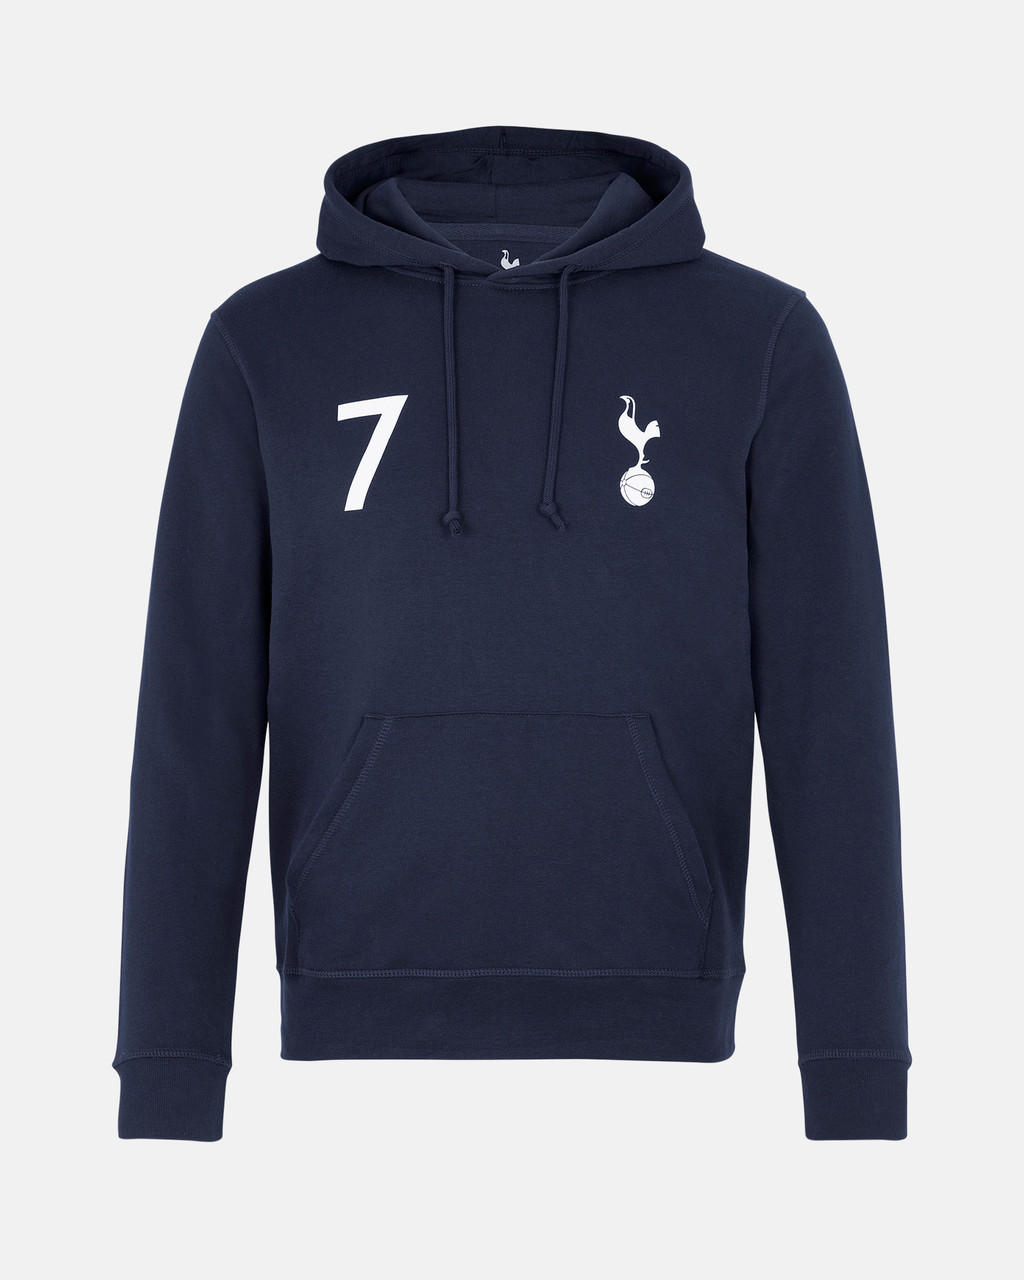  Spurs Mens Navy Son Player Hoodie 